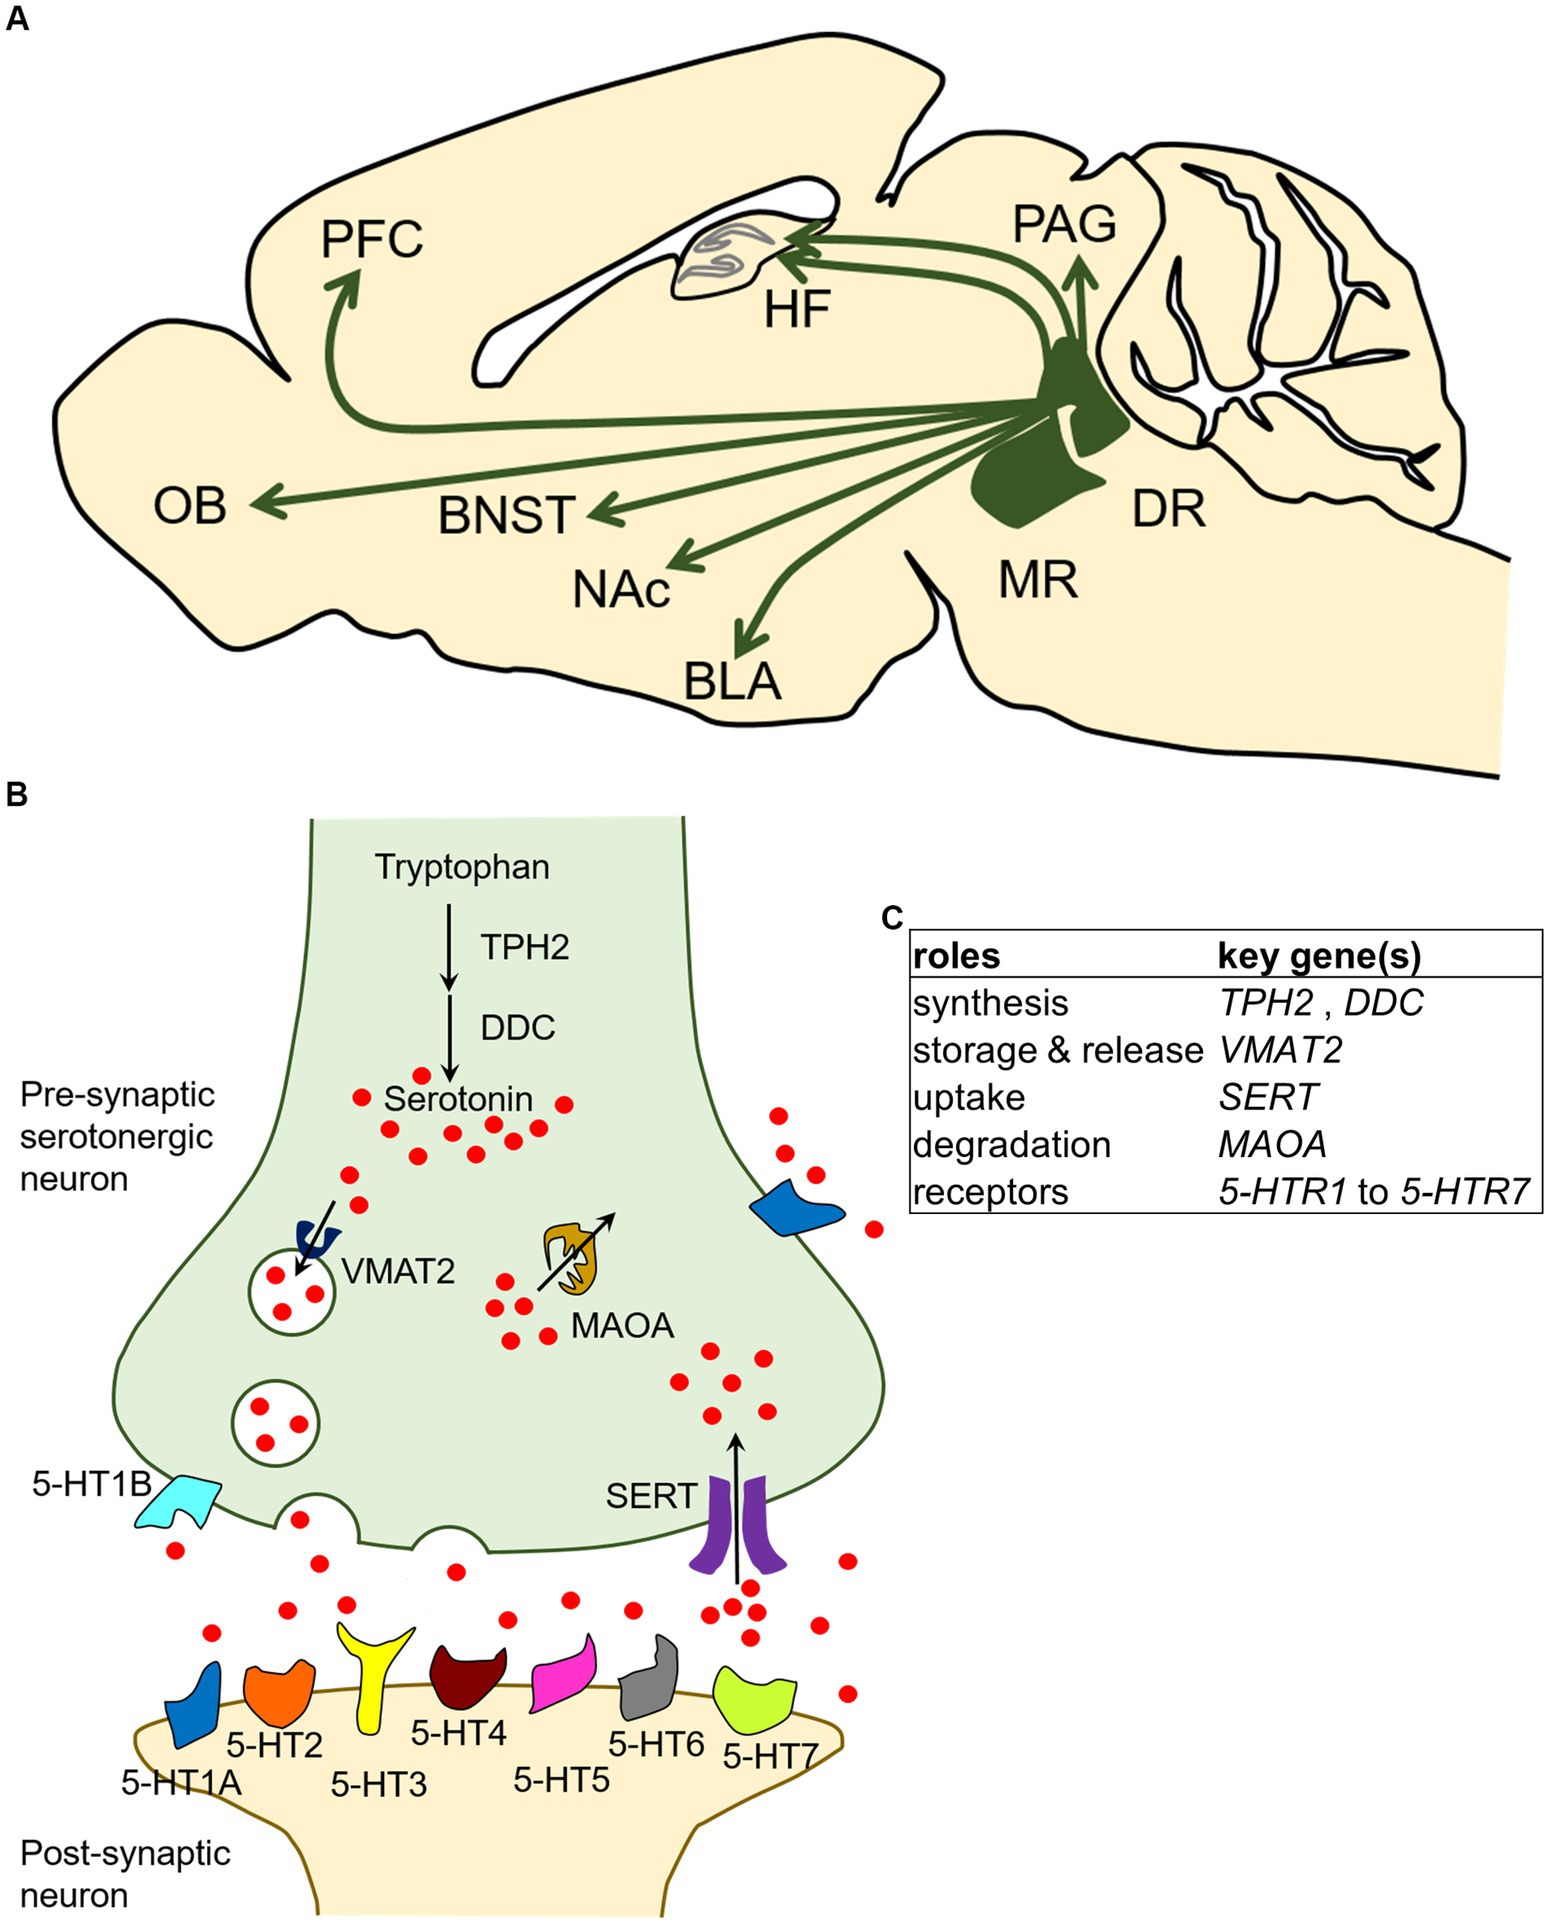 Frontiers | Molecular biology of serotonergic systems in avian brains